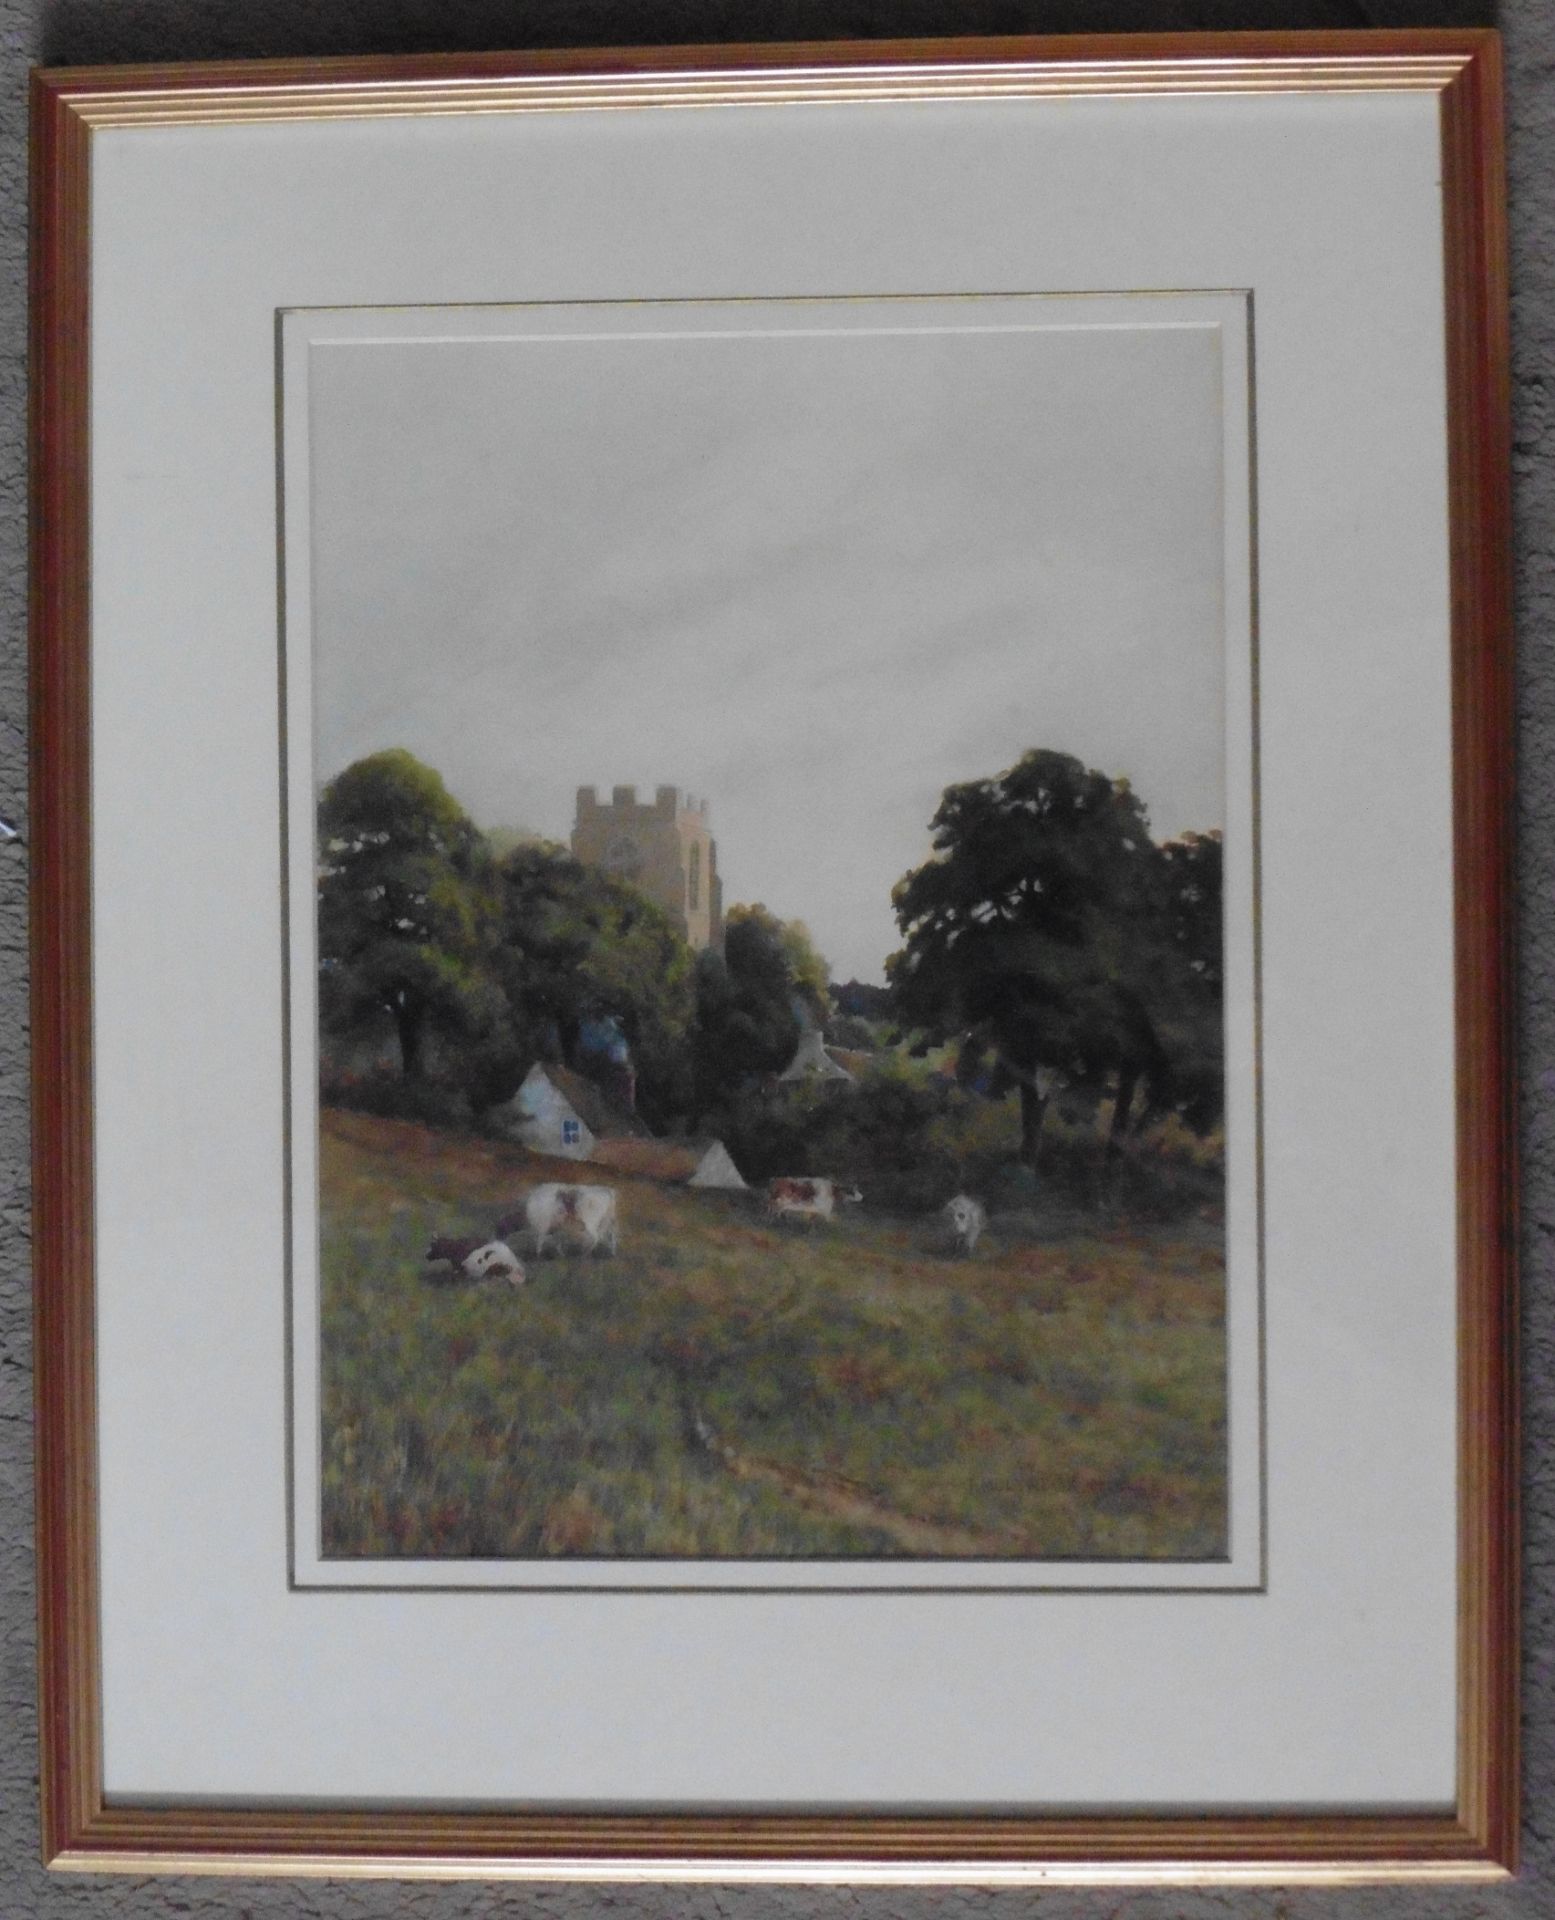 Engilsh School,Original water colour signed by the artist T Molyneux Miller depicting cattle grazing - Image 2 of 3